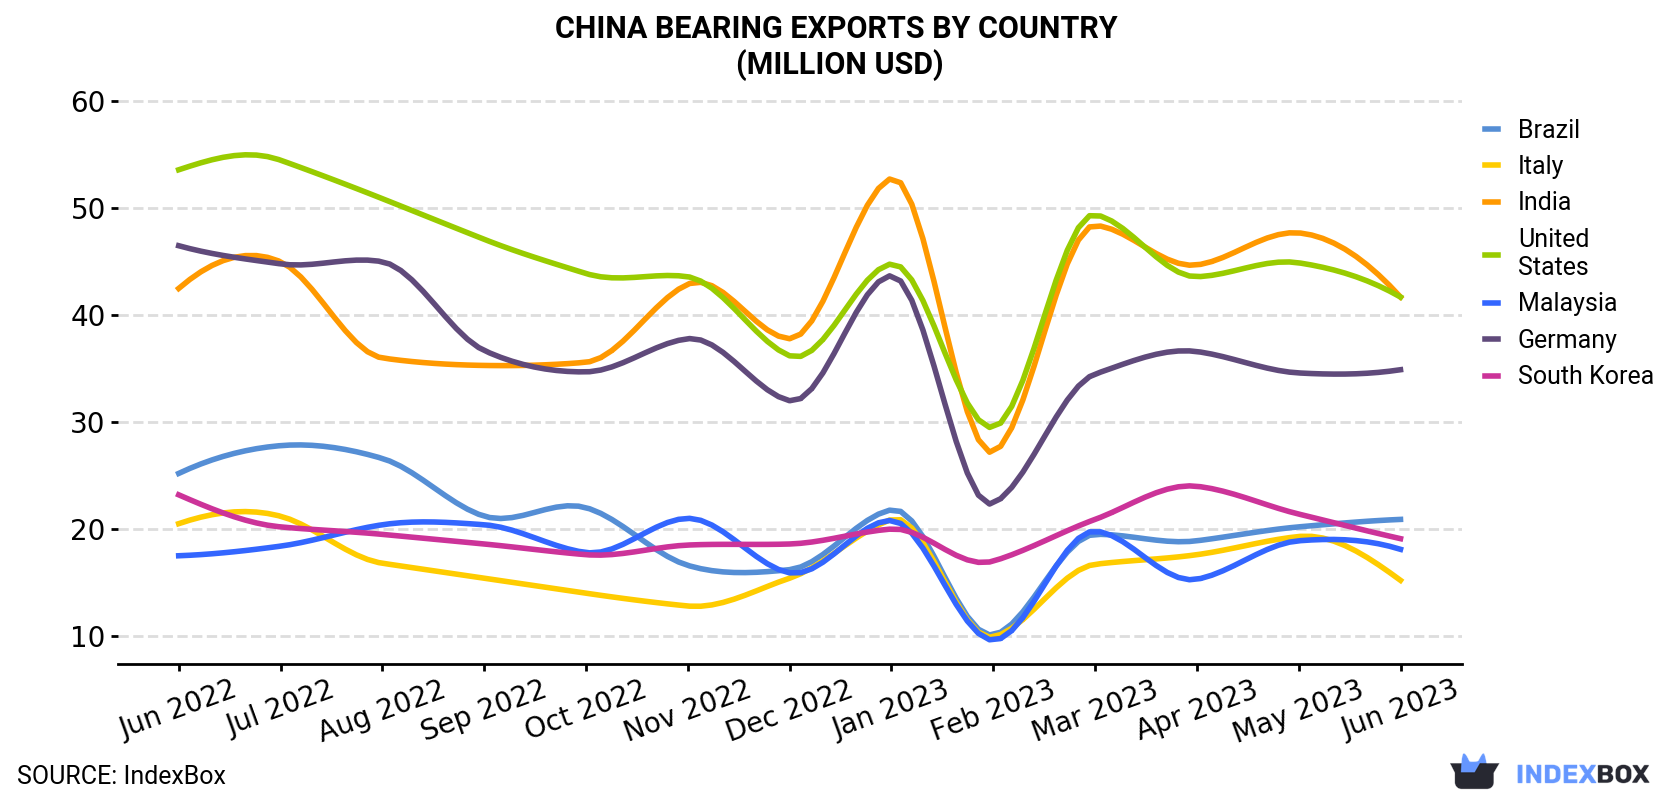 China Bearing Exports By Country (Million USD)